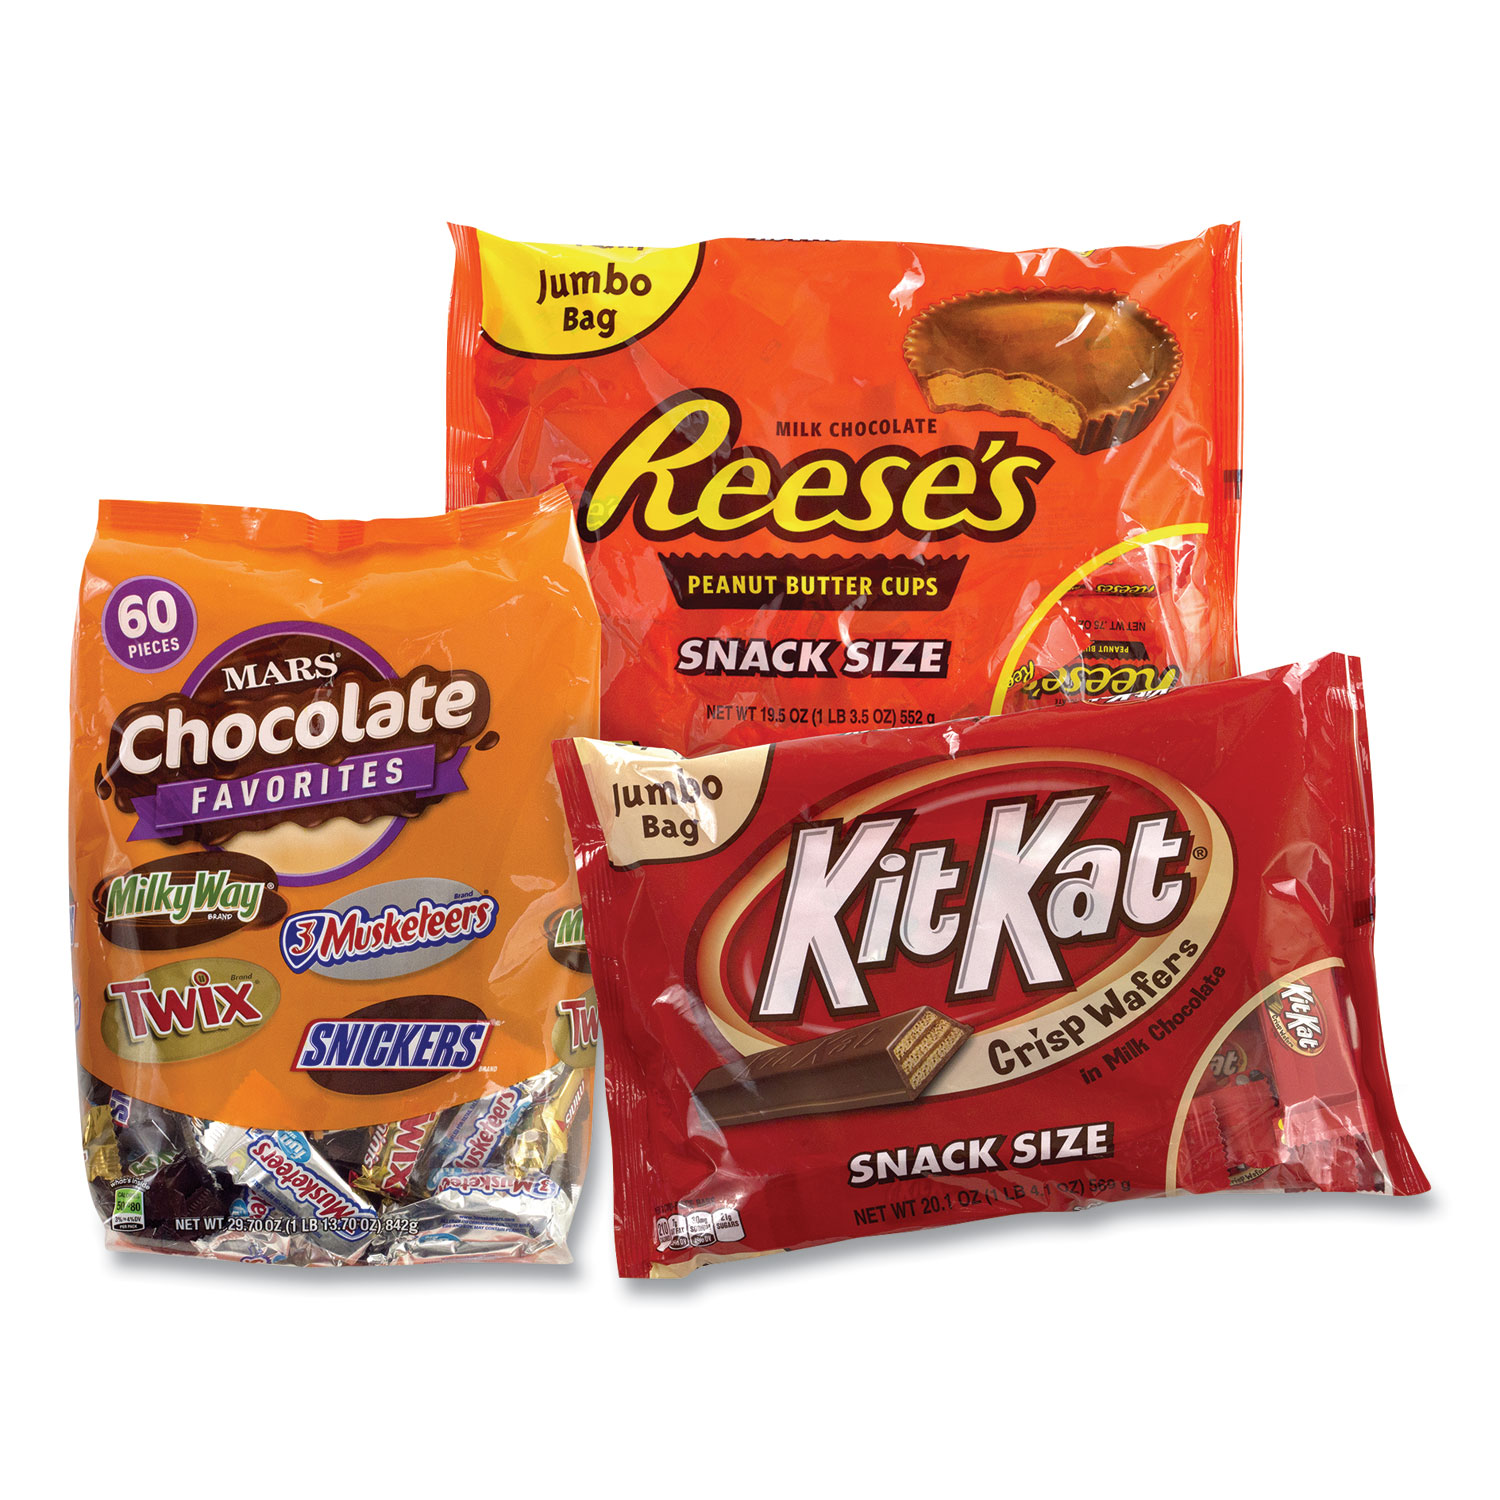  National Brand 600B0004 Chocolate Party Assortment, Mars Asst/Kit Kat/Reese's Peanut Butter Cups, 3 Bag Bundle, Free Delivery in 1-4 Business Days (GRR600B0004) 